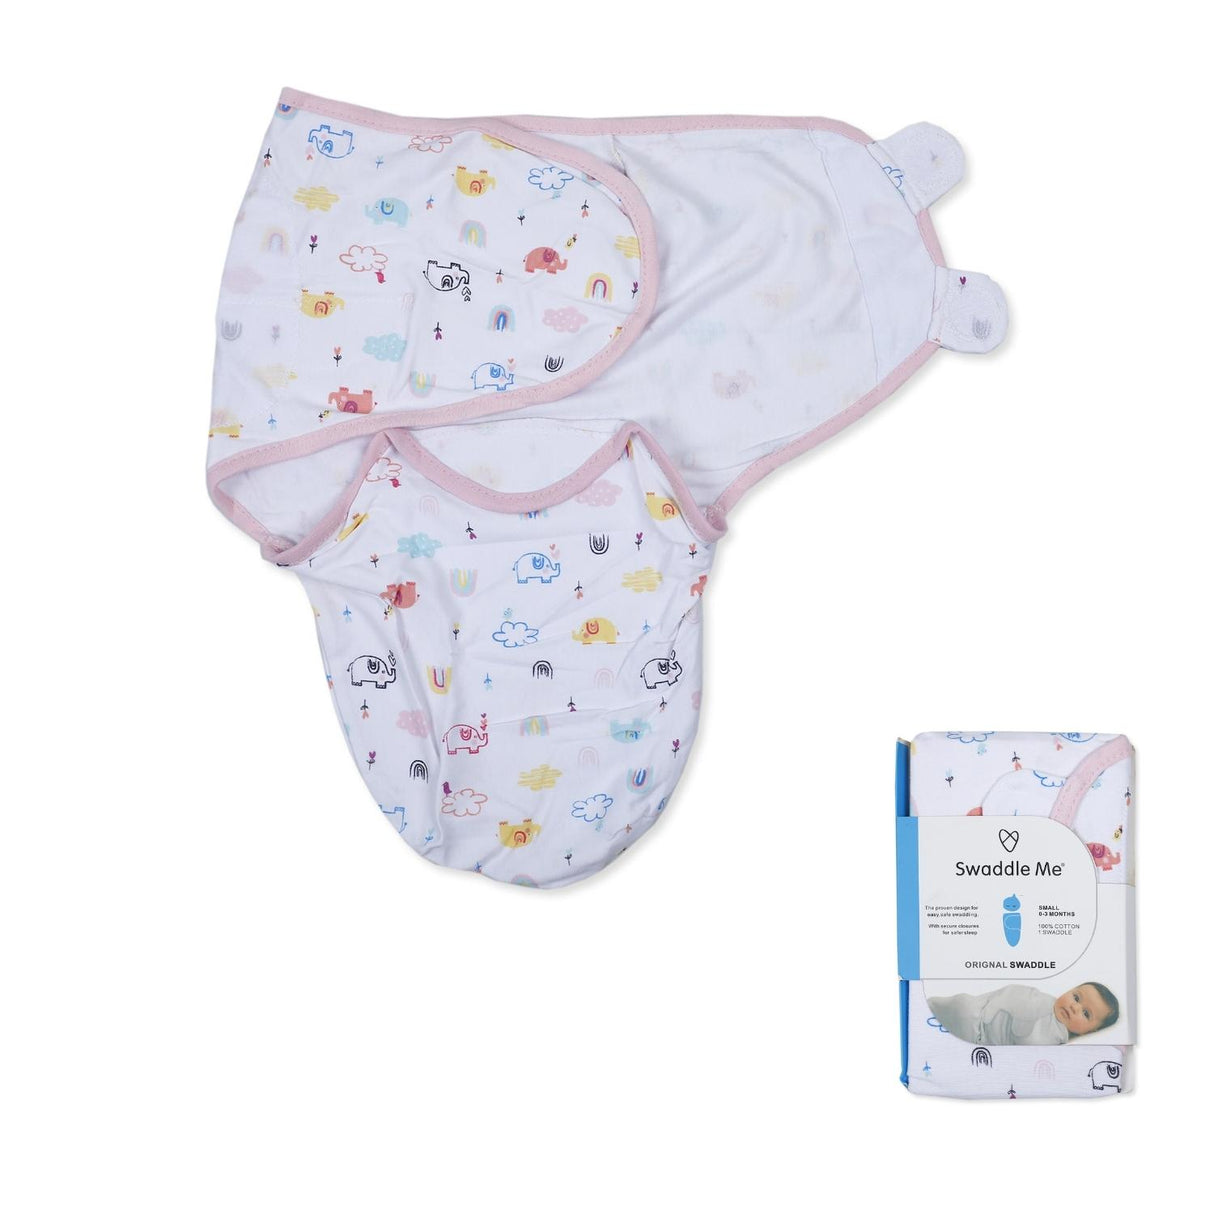 Adorable Comfy Cotton Ready Swaddle